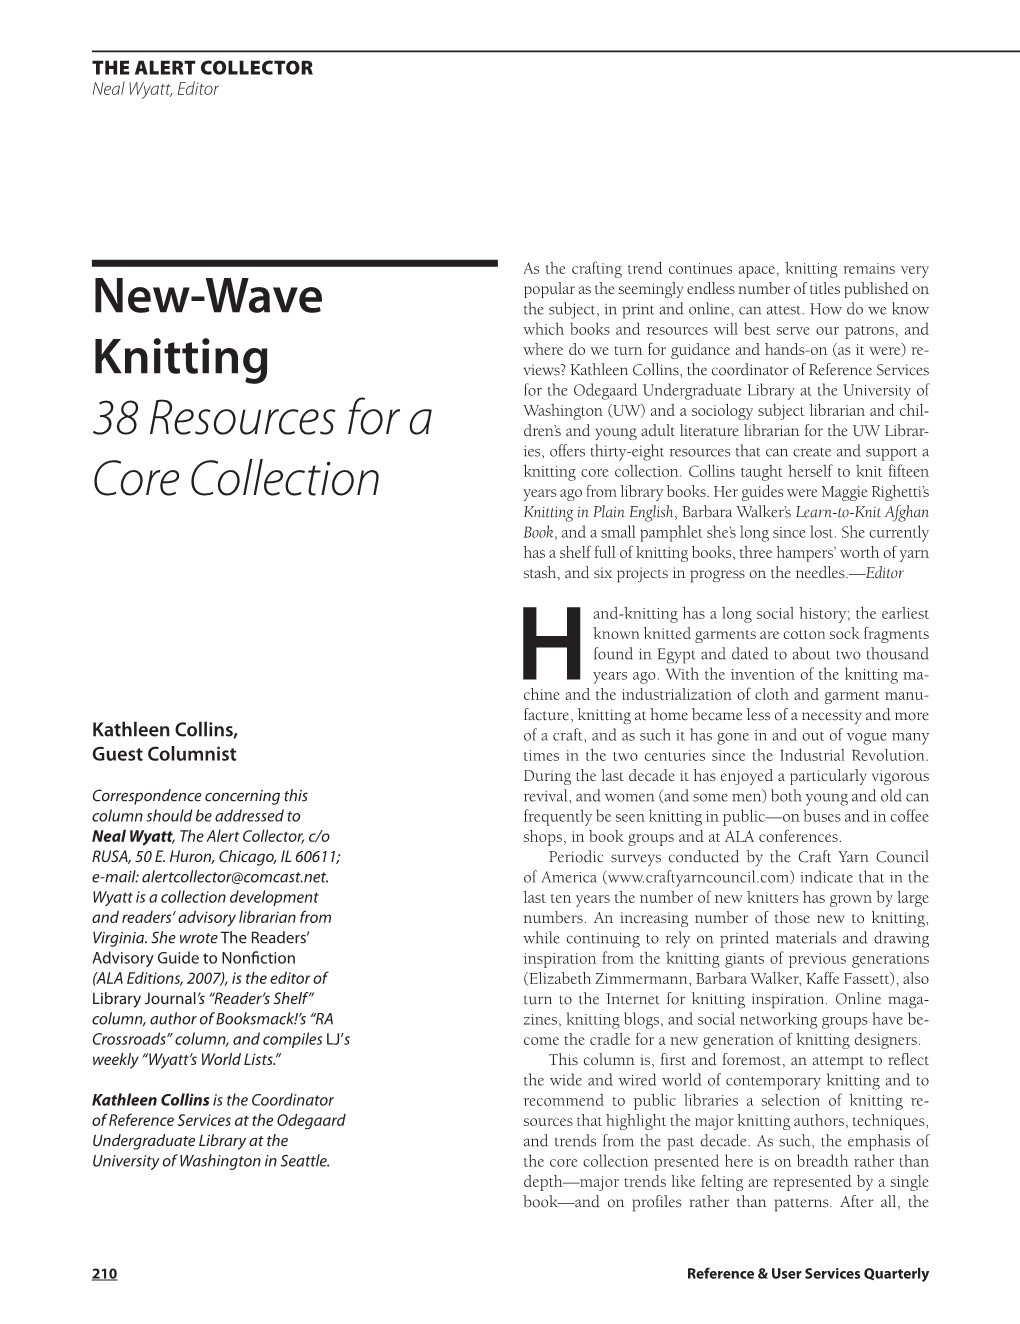 New-Wave Knitting 38 Resources for a Core Collection